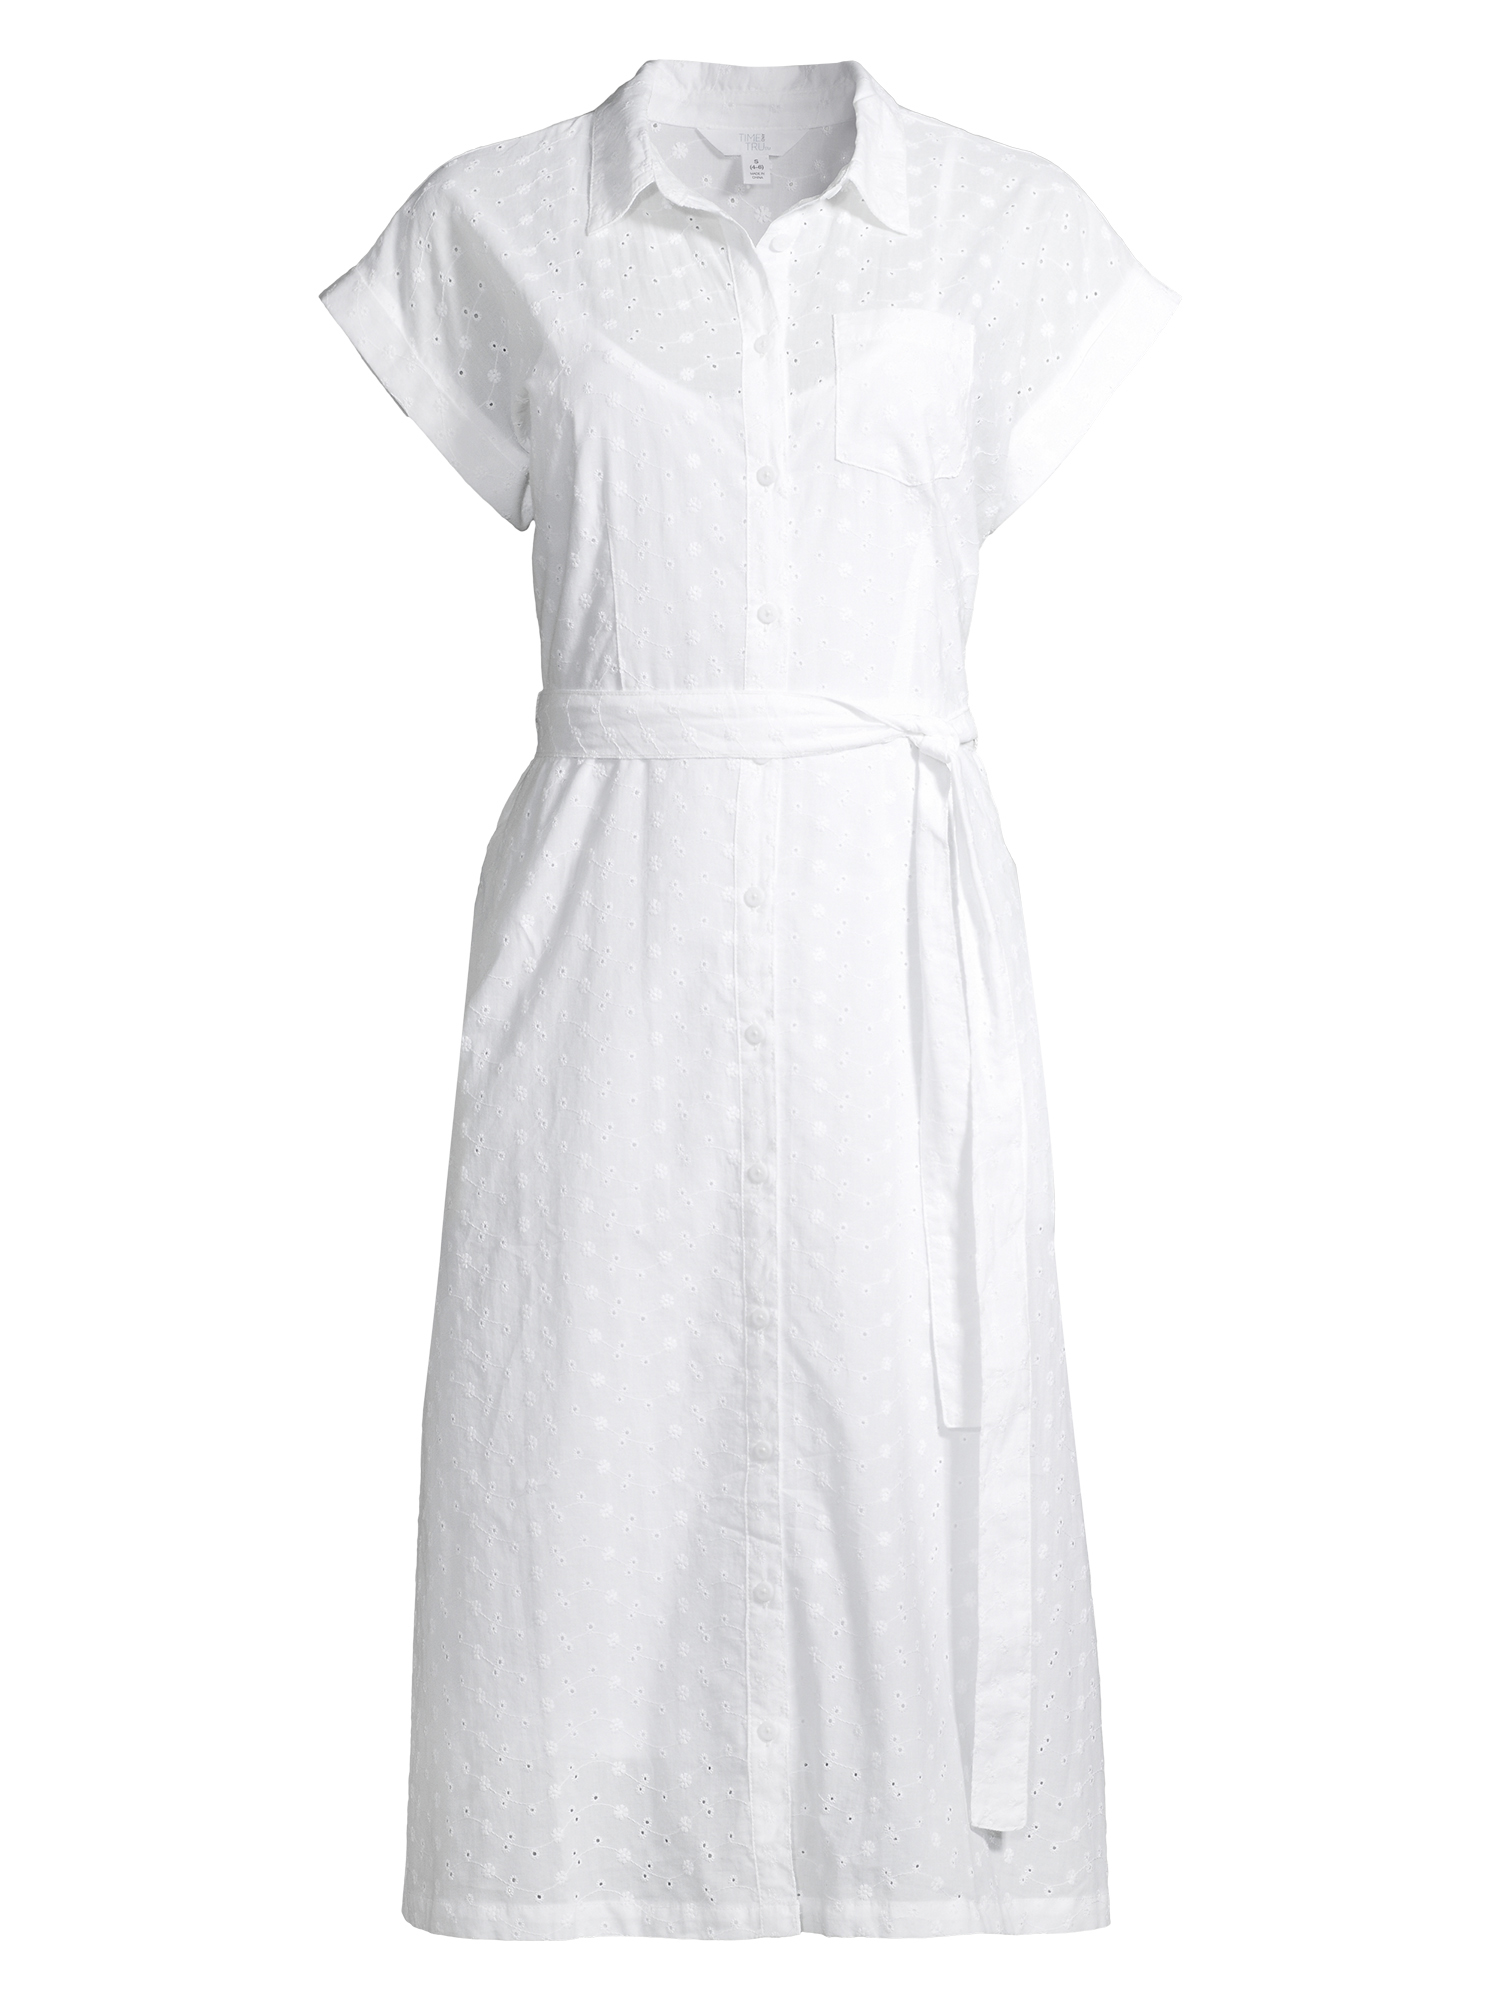 Time and Tru Women's Eyelet Belted Midi Shirt Dress - image 4 of 6